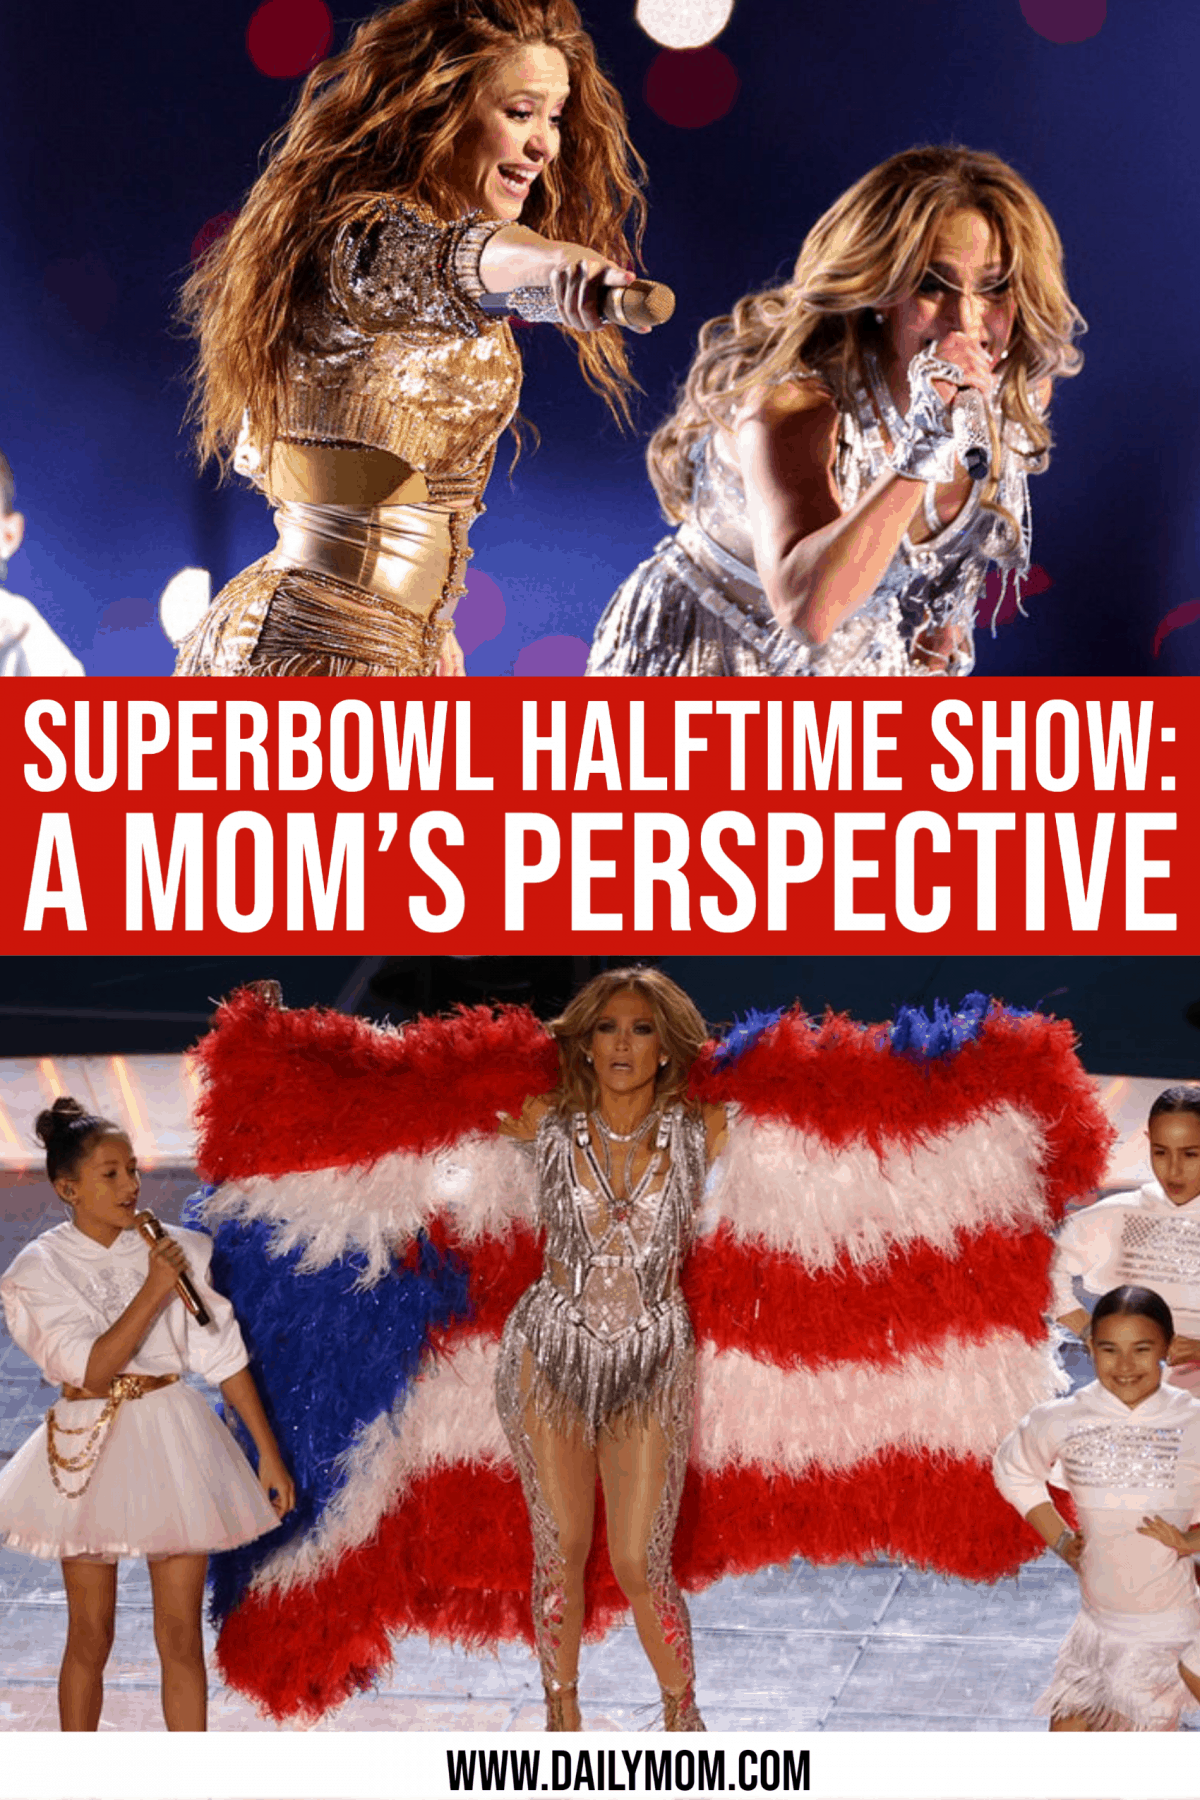 Superbowl Halftime Shows: One Modern Mother’S Opinion